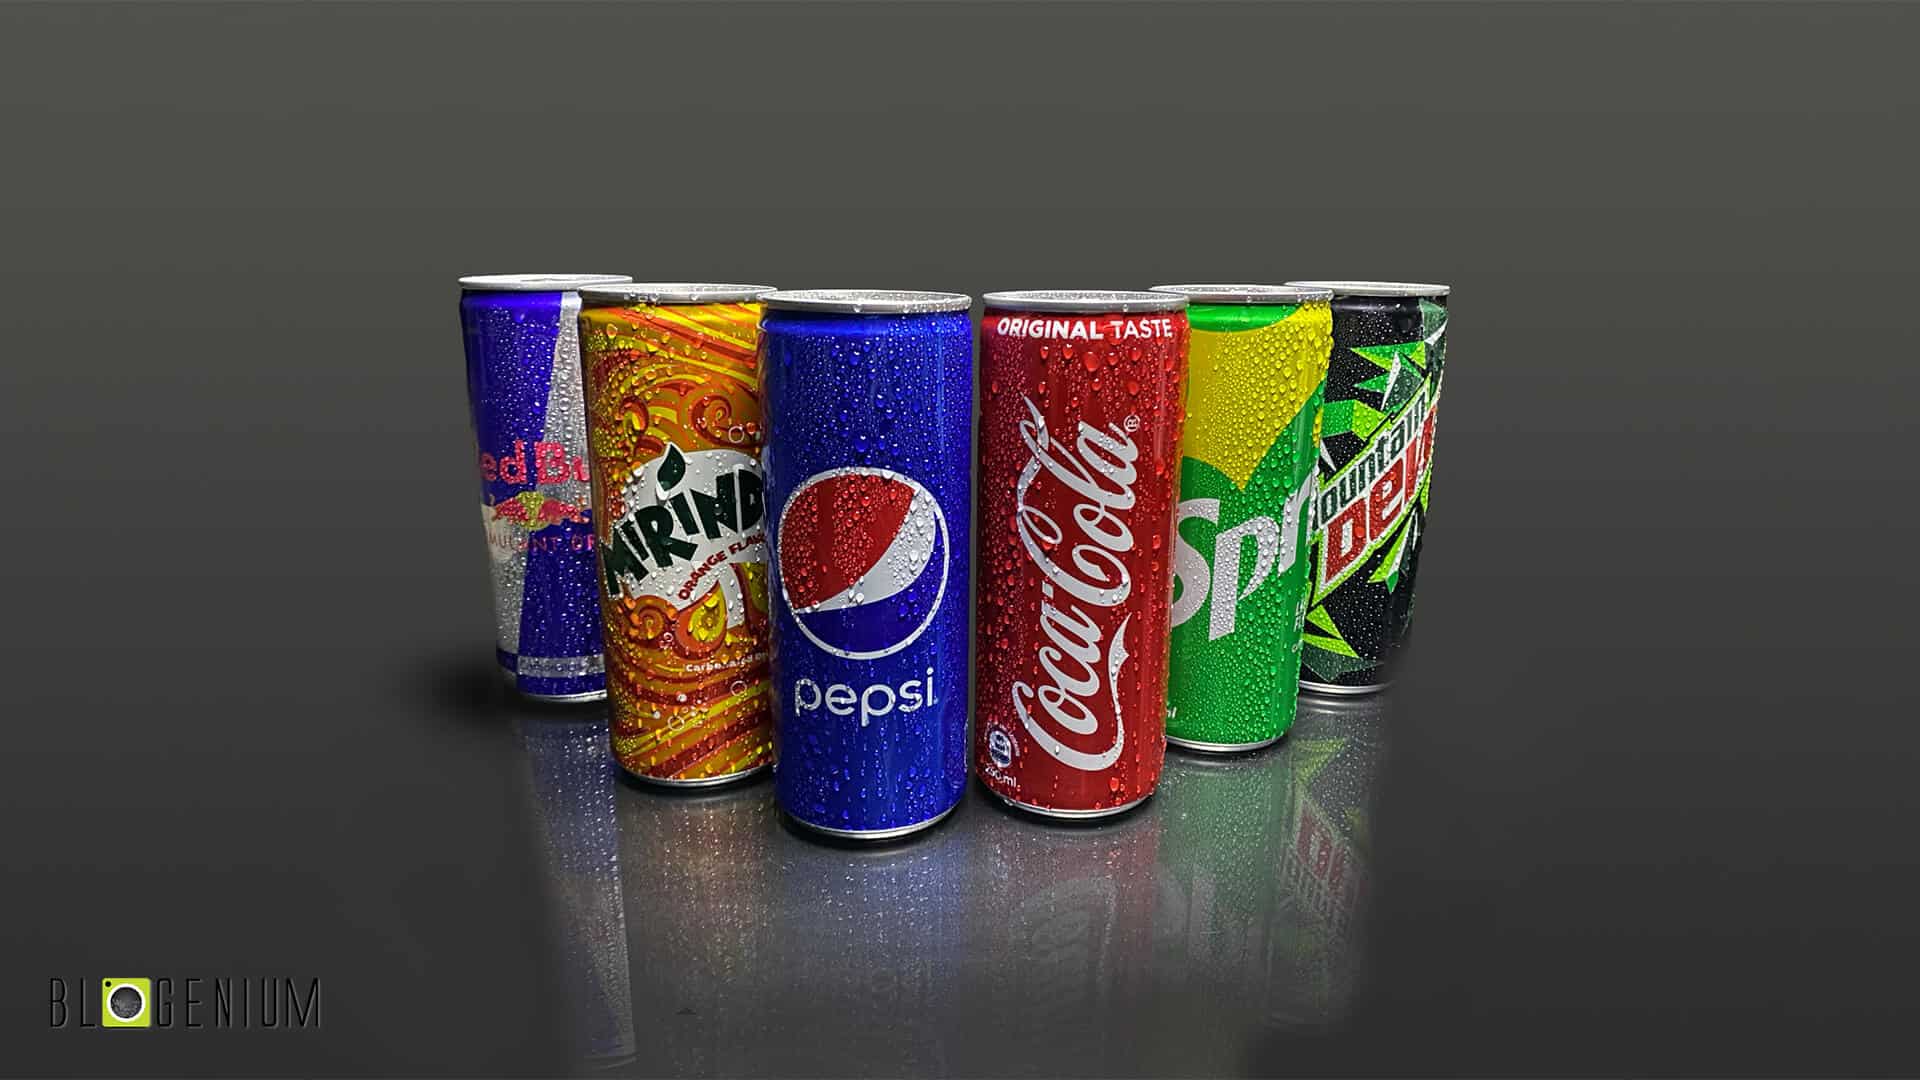 Cold Drinks Images Wallpapers